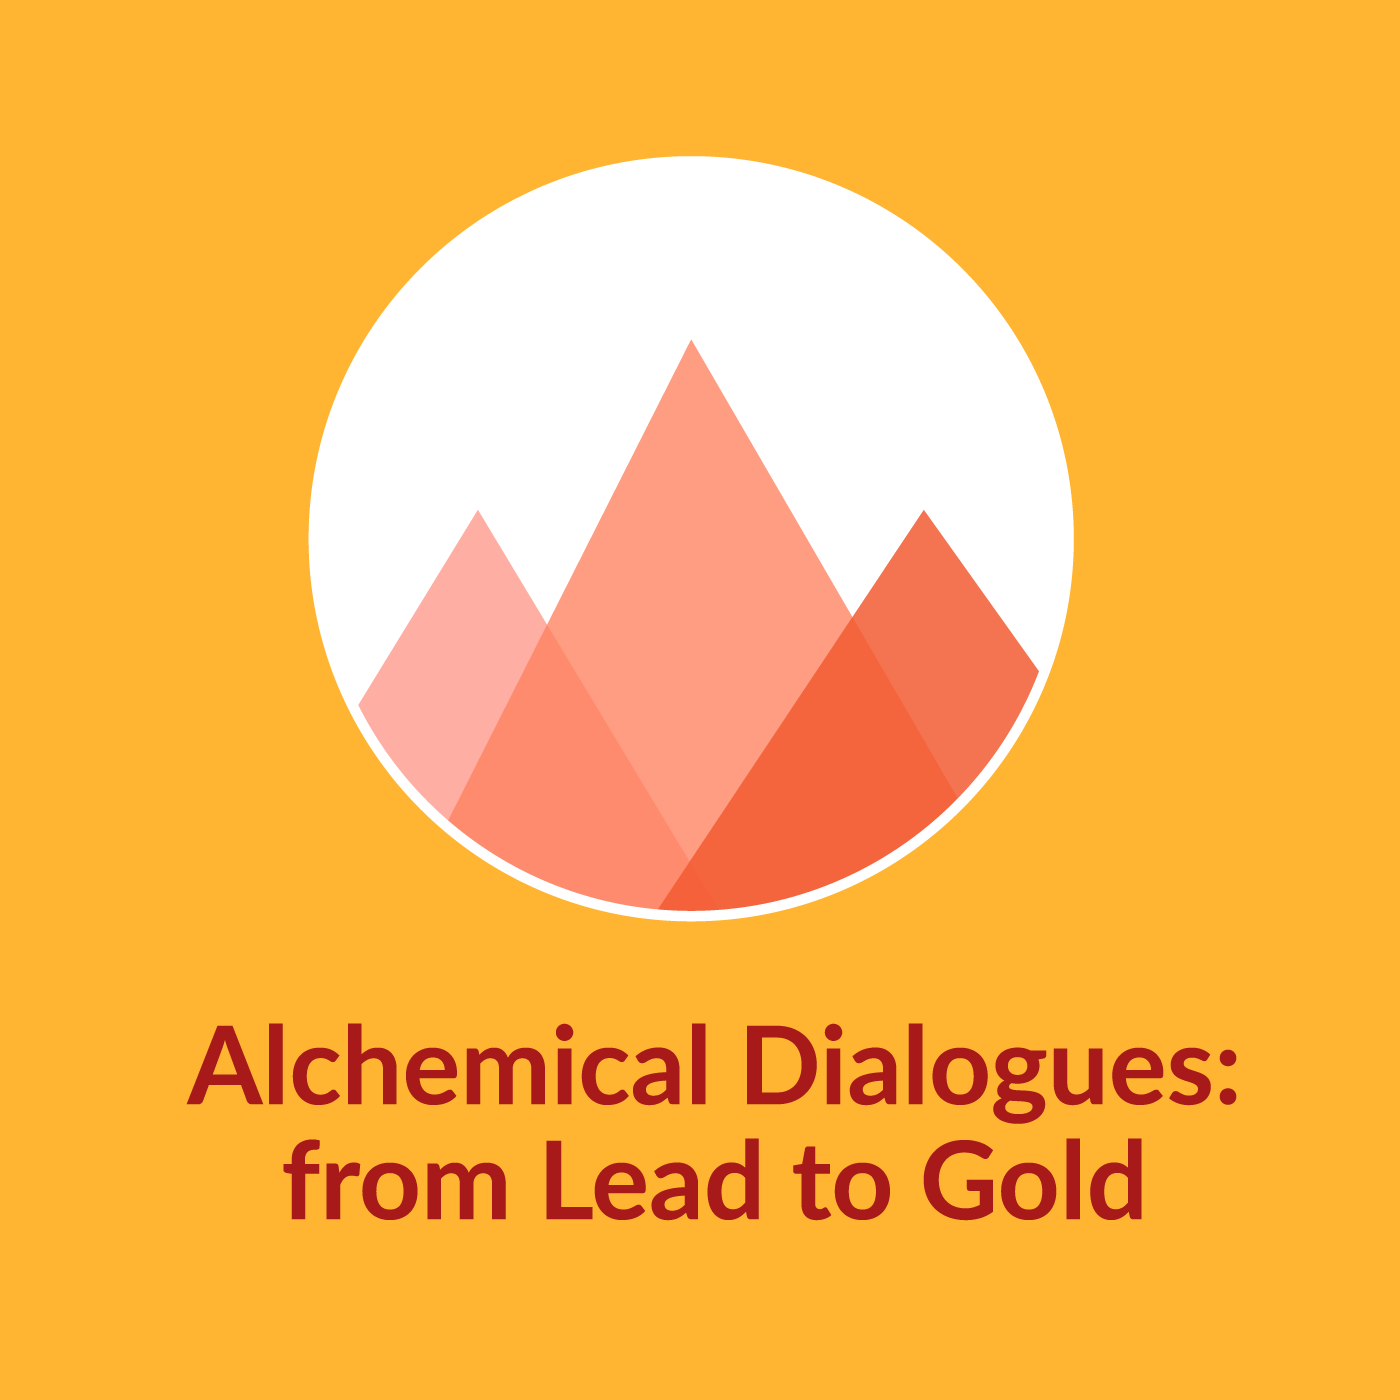 Alchemical Dialogues - from Lead to Gold